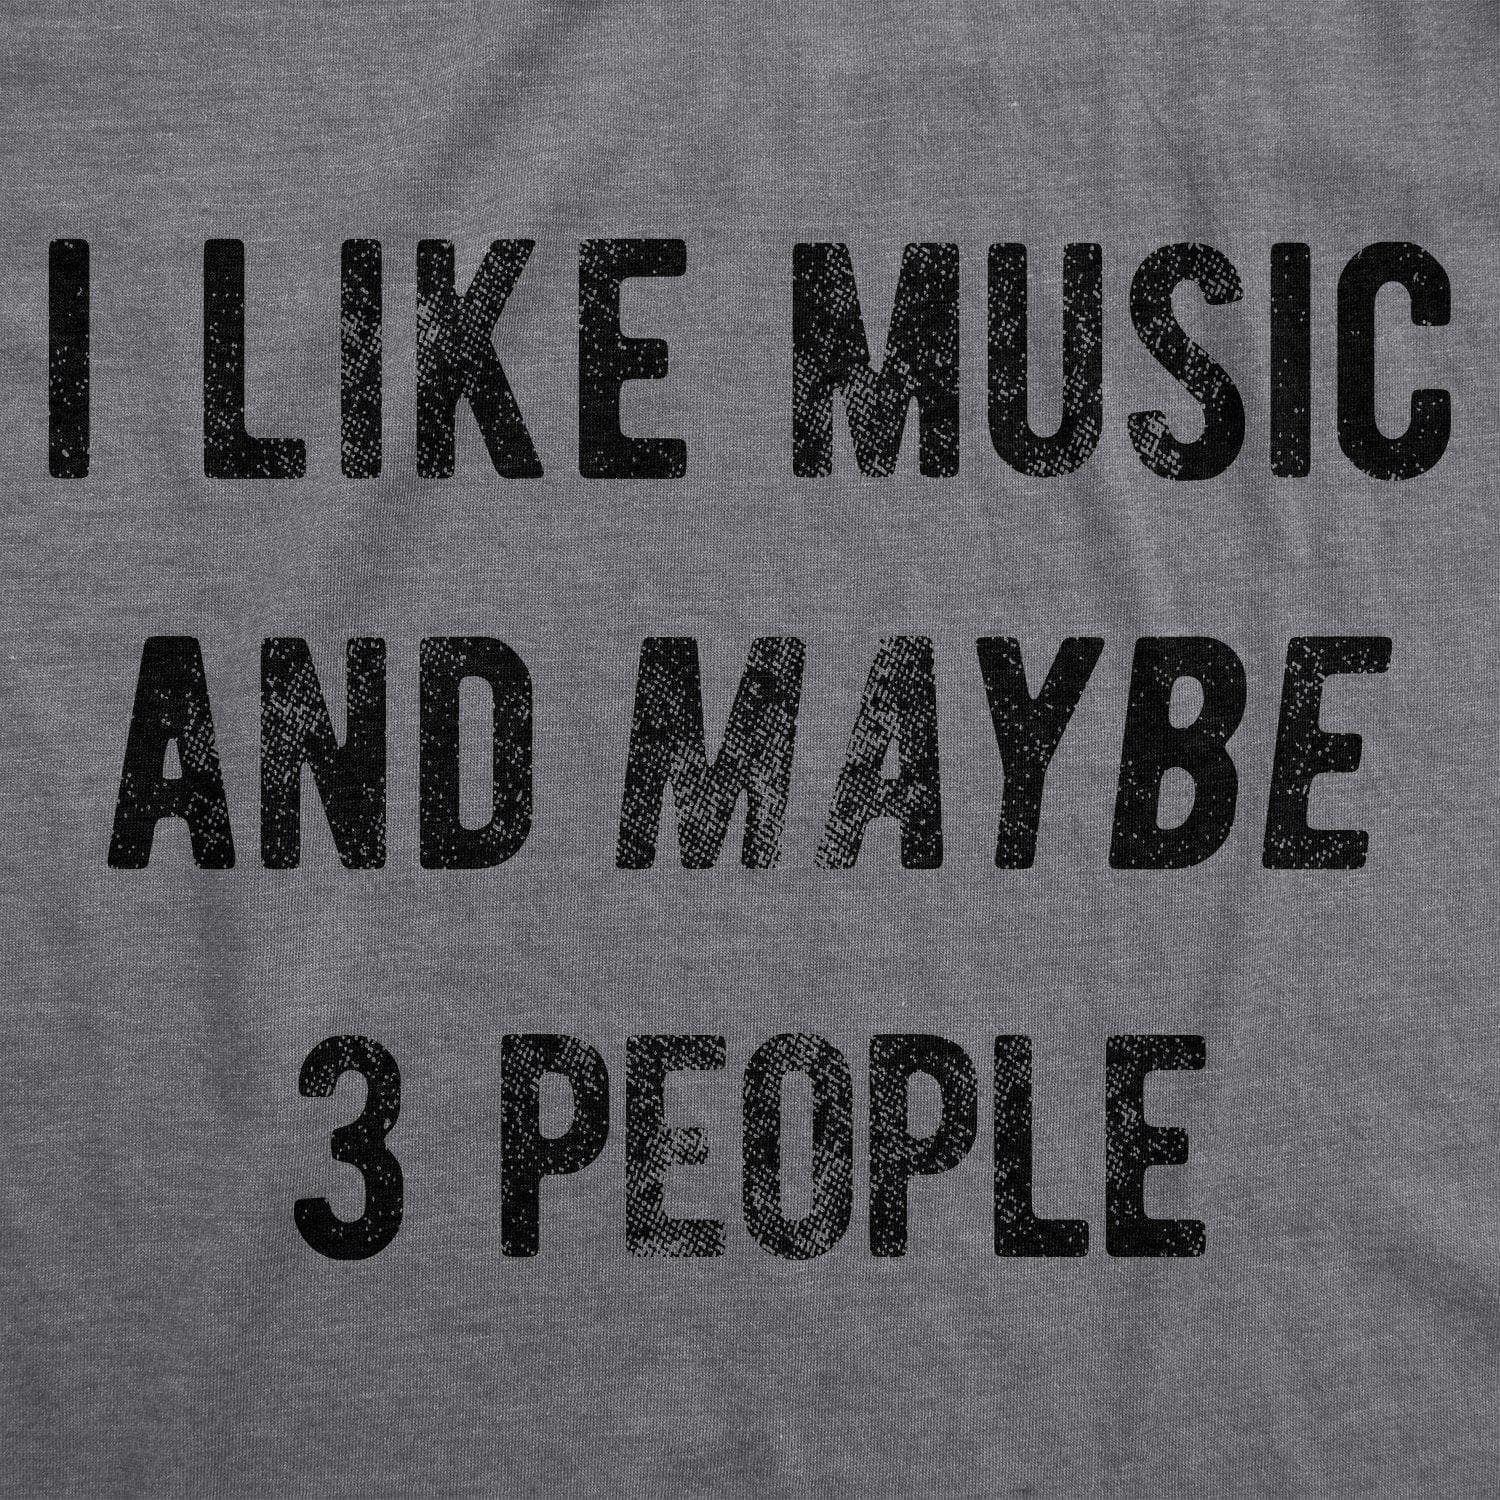 I Like Music And Maybe 3 People Women's Tshirt  -  Crazy Dog T-Shirts